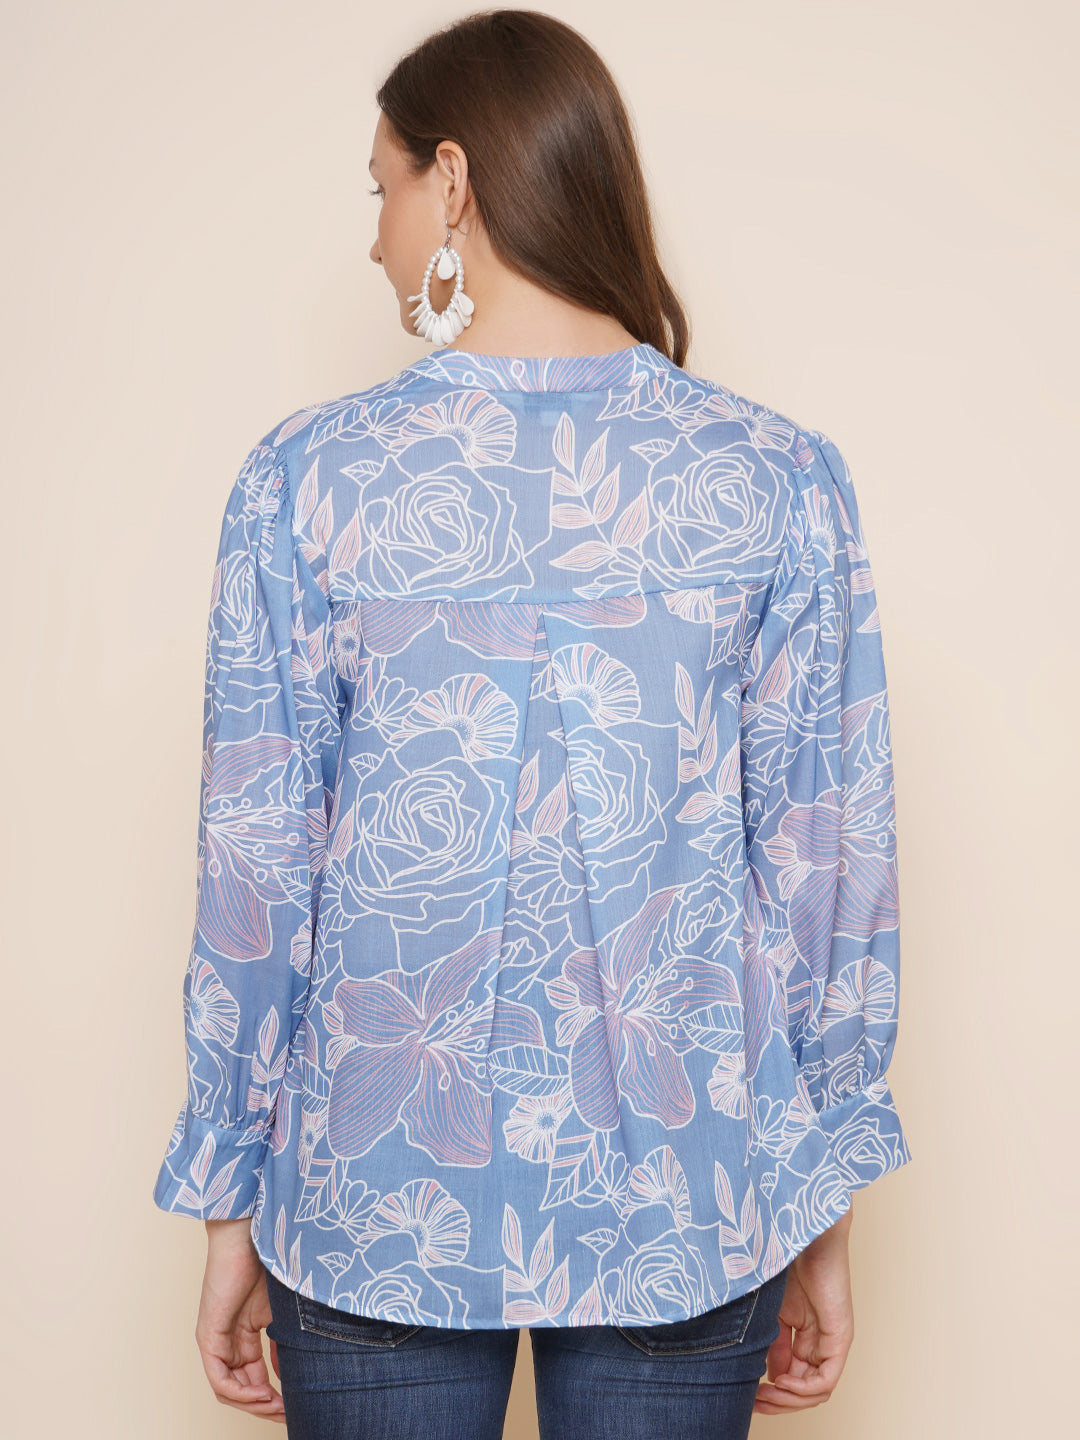 Bhama Couture Sky Blue Printed Top